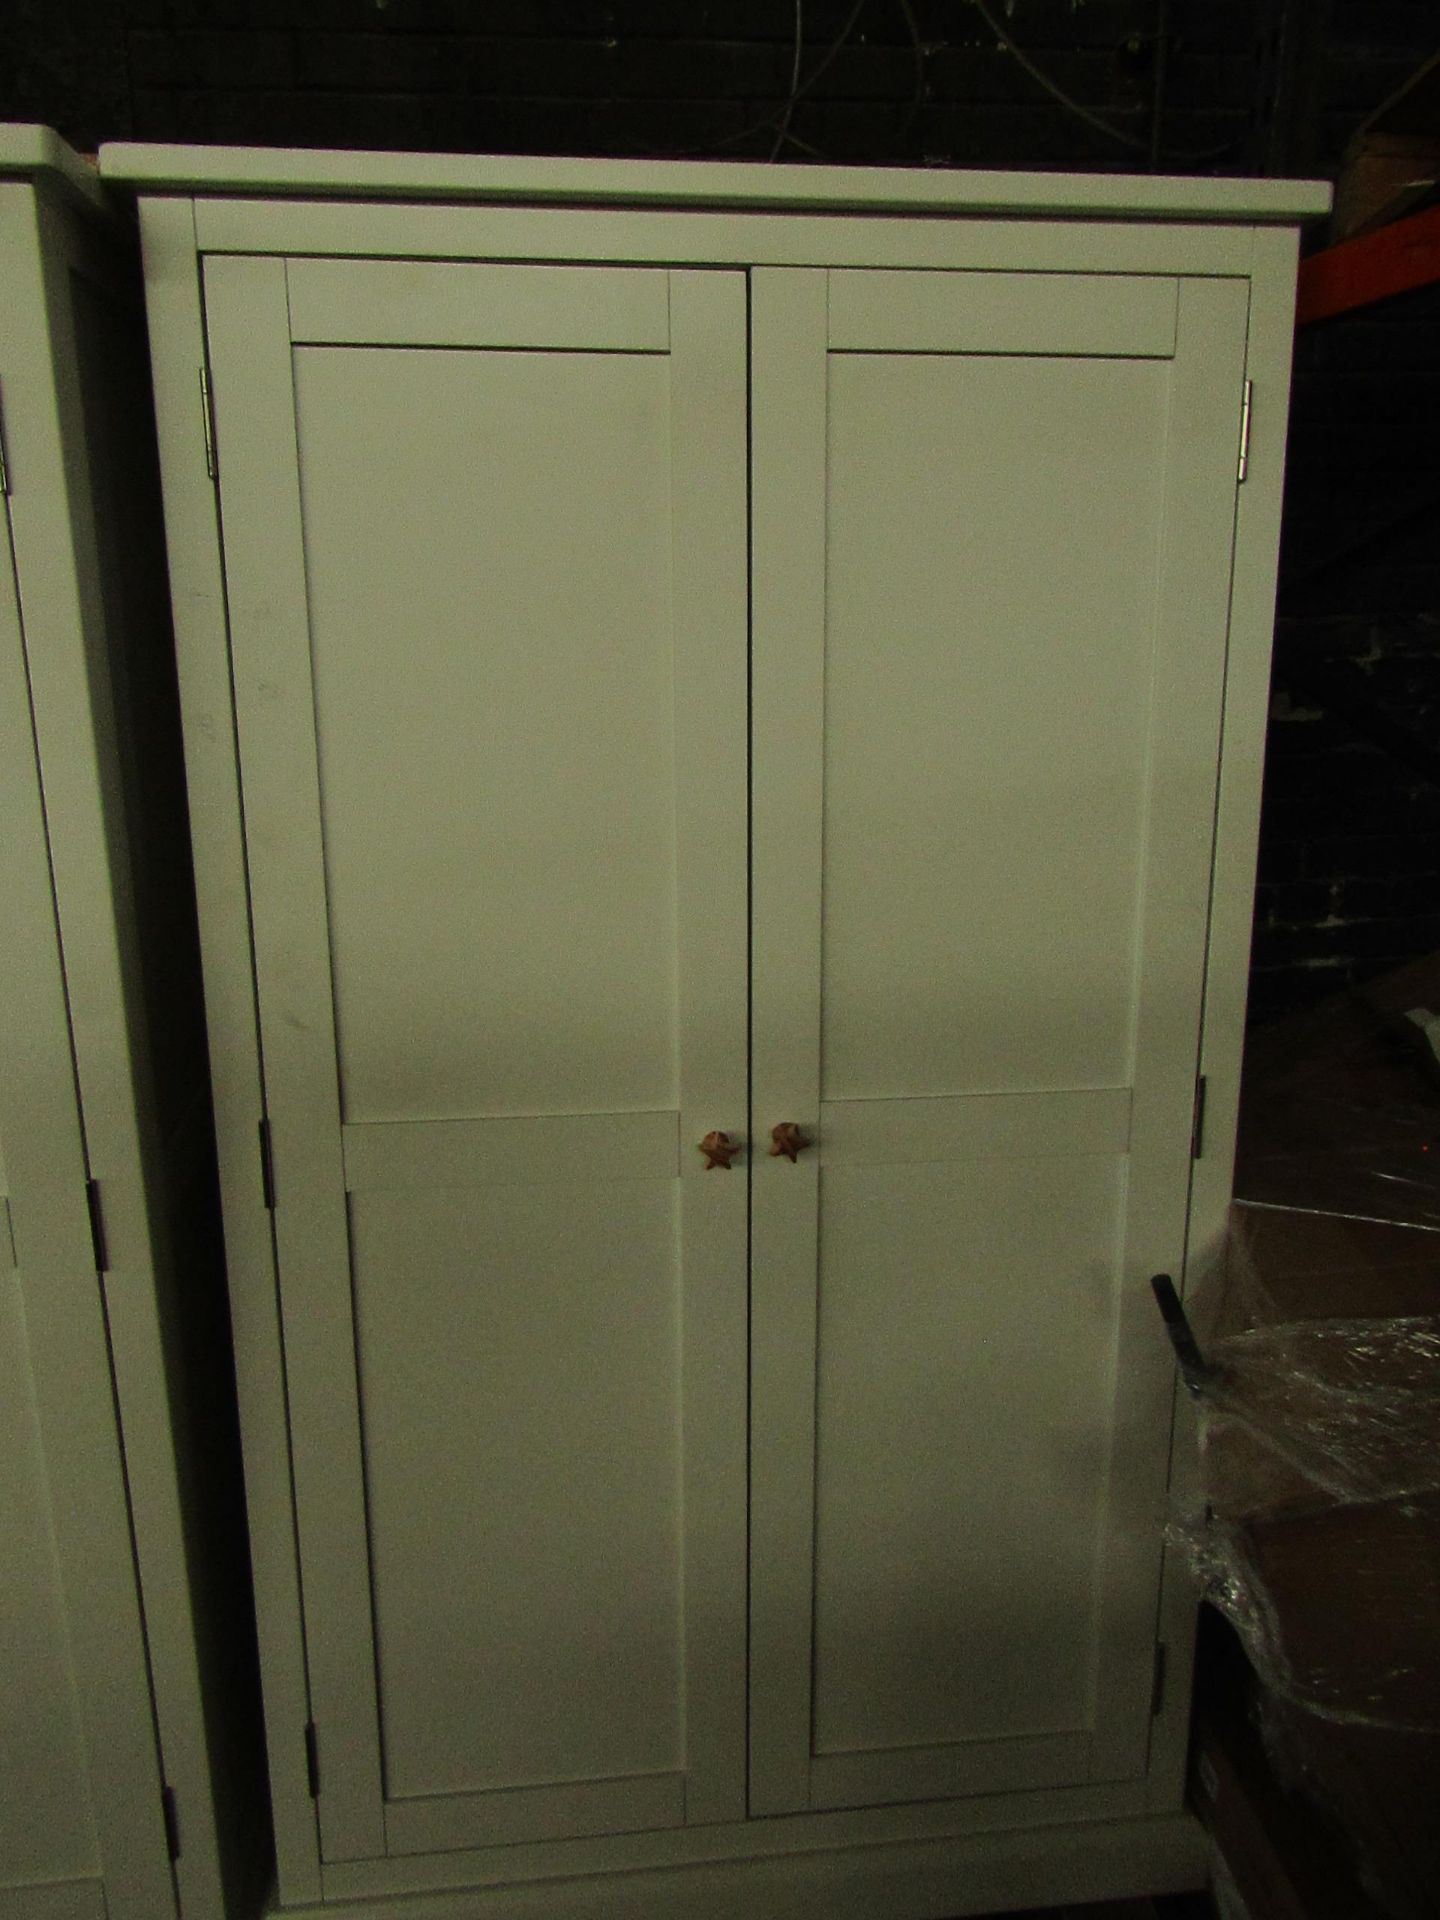 Cotswold Company Littleton Warm White Painted Double Wardrobe RRP Â£495.00 - This item looks to be